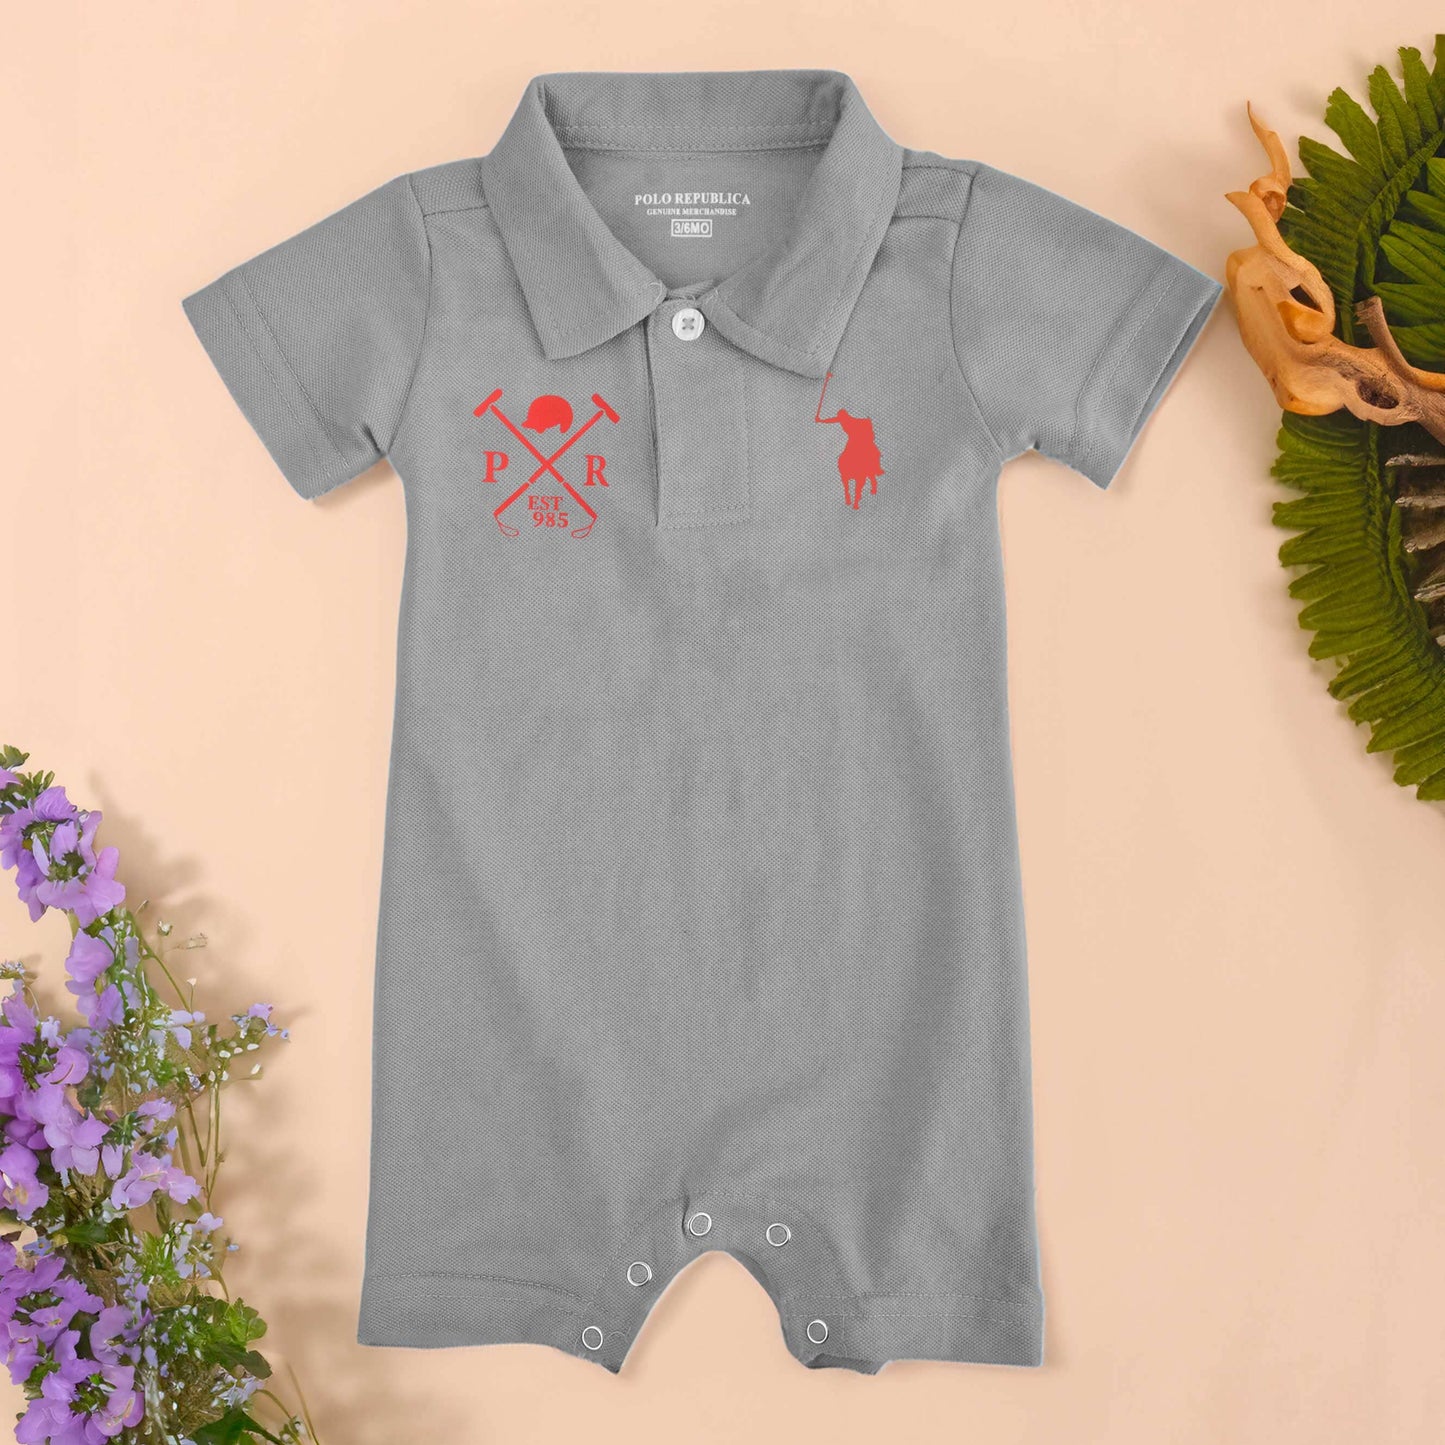 Polo Republica Signature Pony PR Mallets Printed Short Sleeve Baby Romper Romper Polo Republica Grey & Red 0-3 Months 